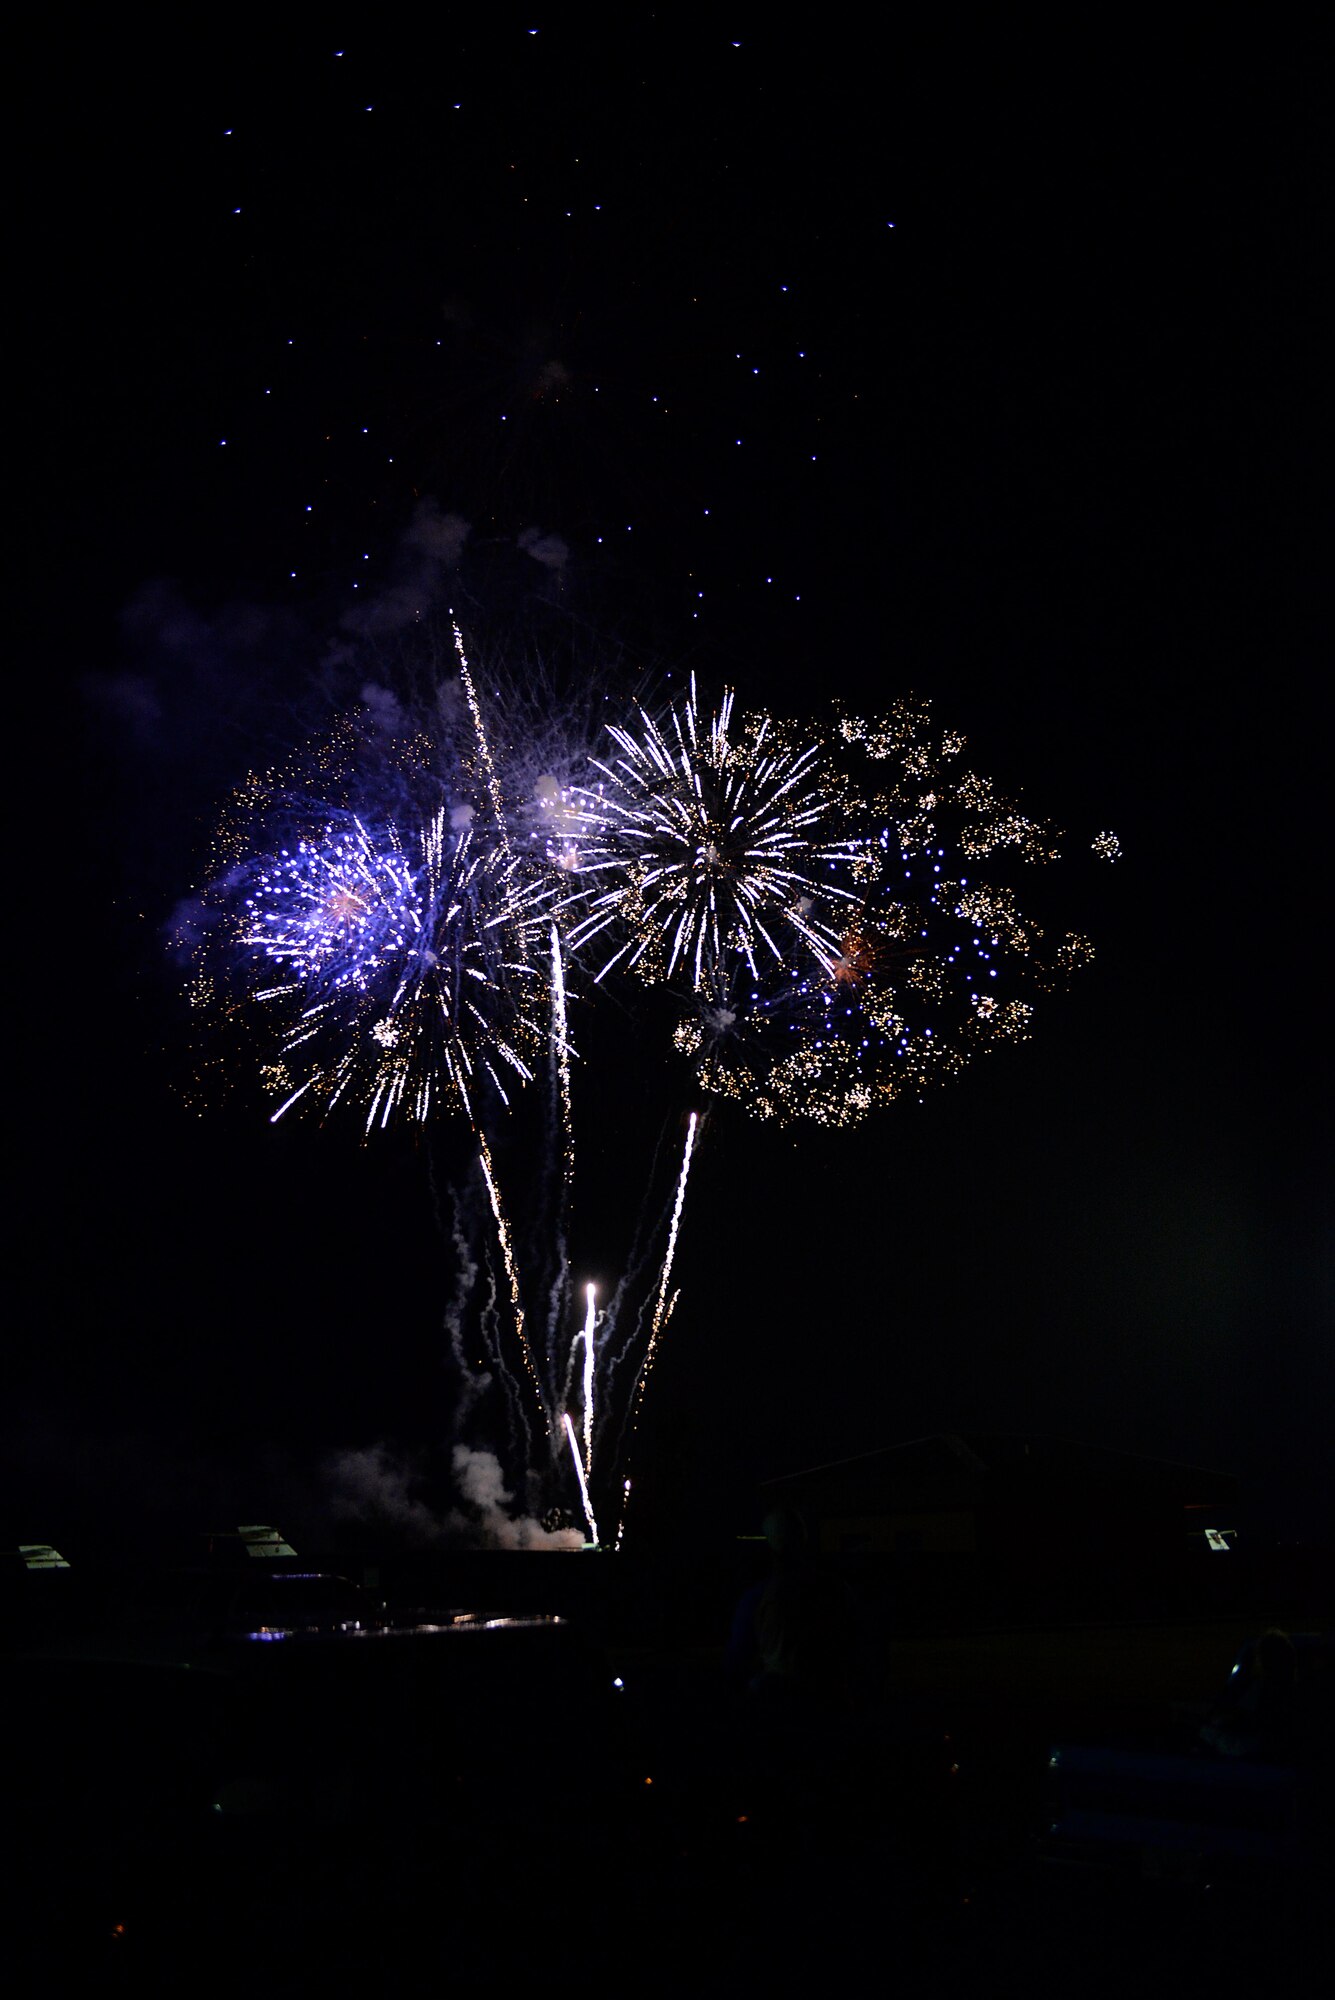 Fireworks light up the night sky over Columbus Air Force Base, Miss. during the BLAZE Fest Fireworks show, July 3, 2020. The majority of the show was viewable with a clear line of site up to 1 mile, along with Facebook livestreaming the show for others who could not join the viewing. (U.S. Air Force photo by Airman 1st Class Hannah Bean)